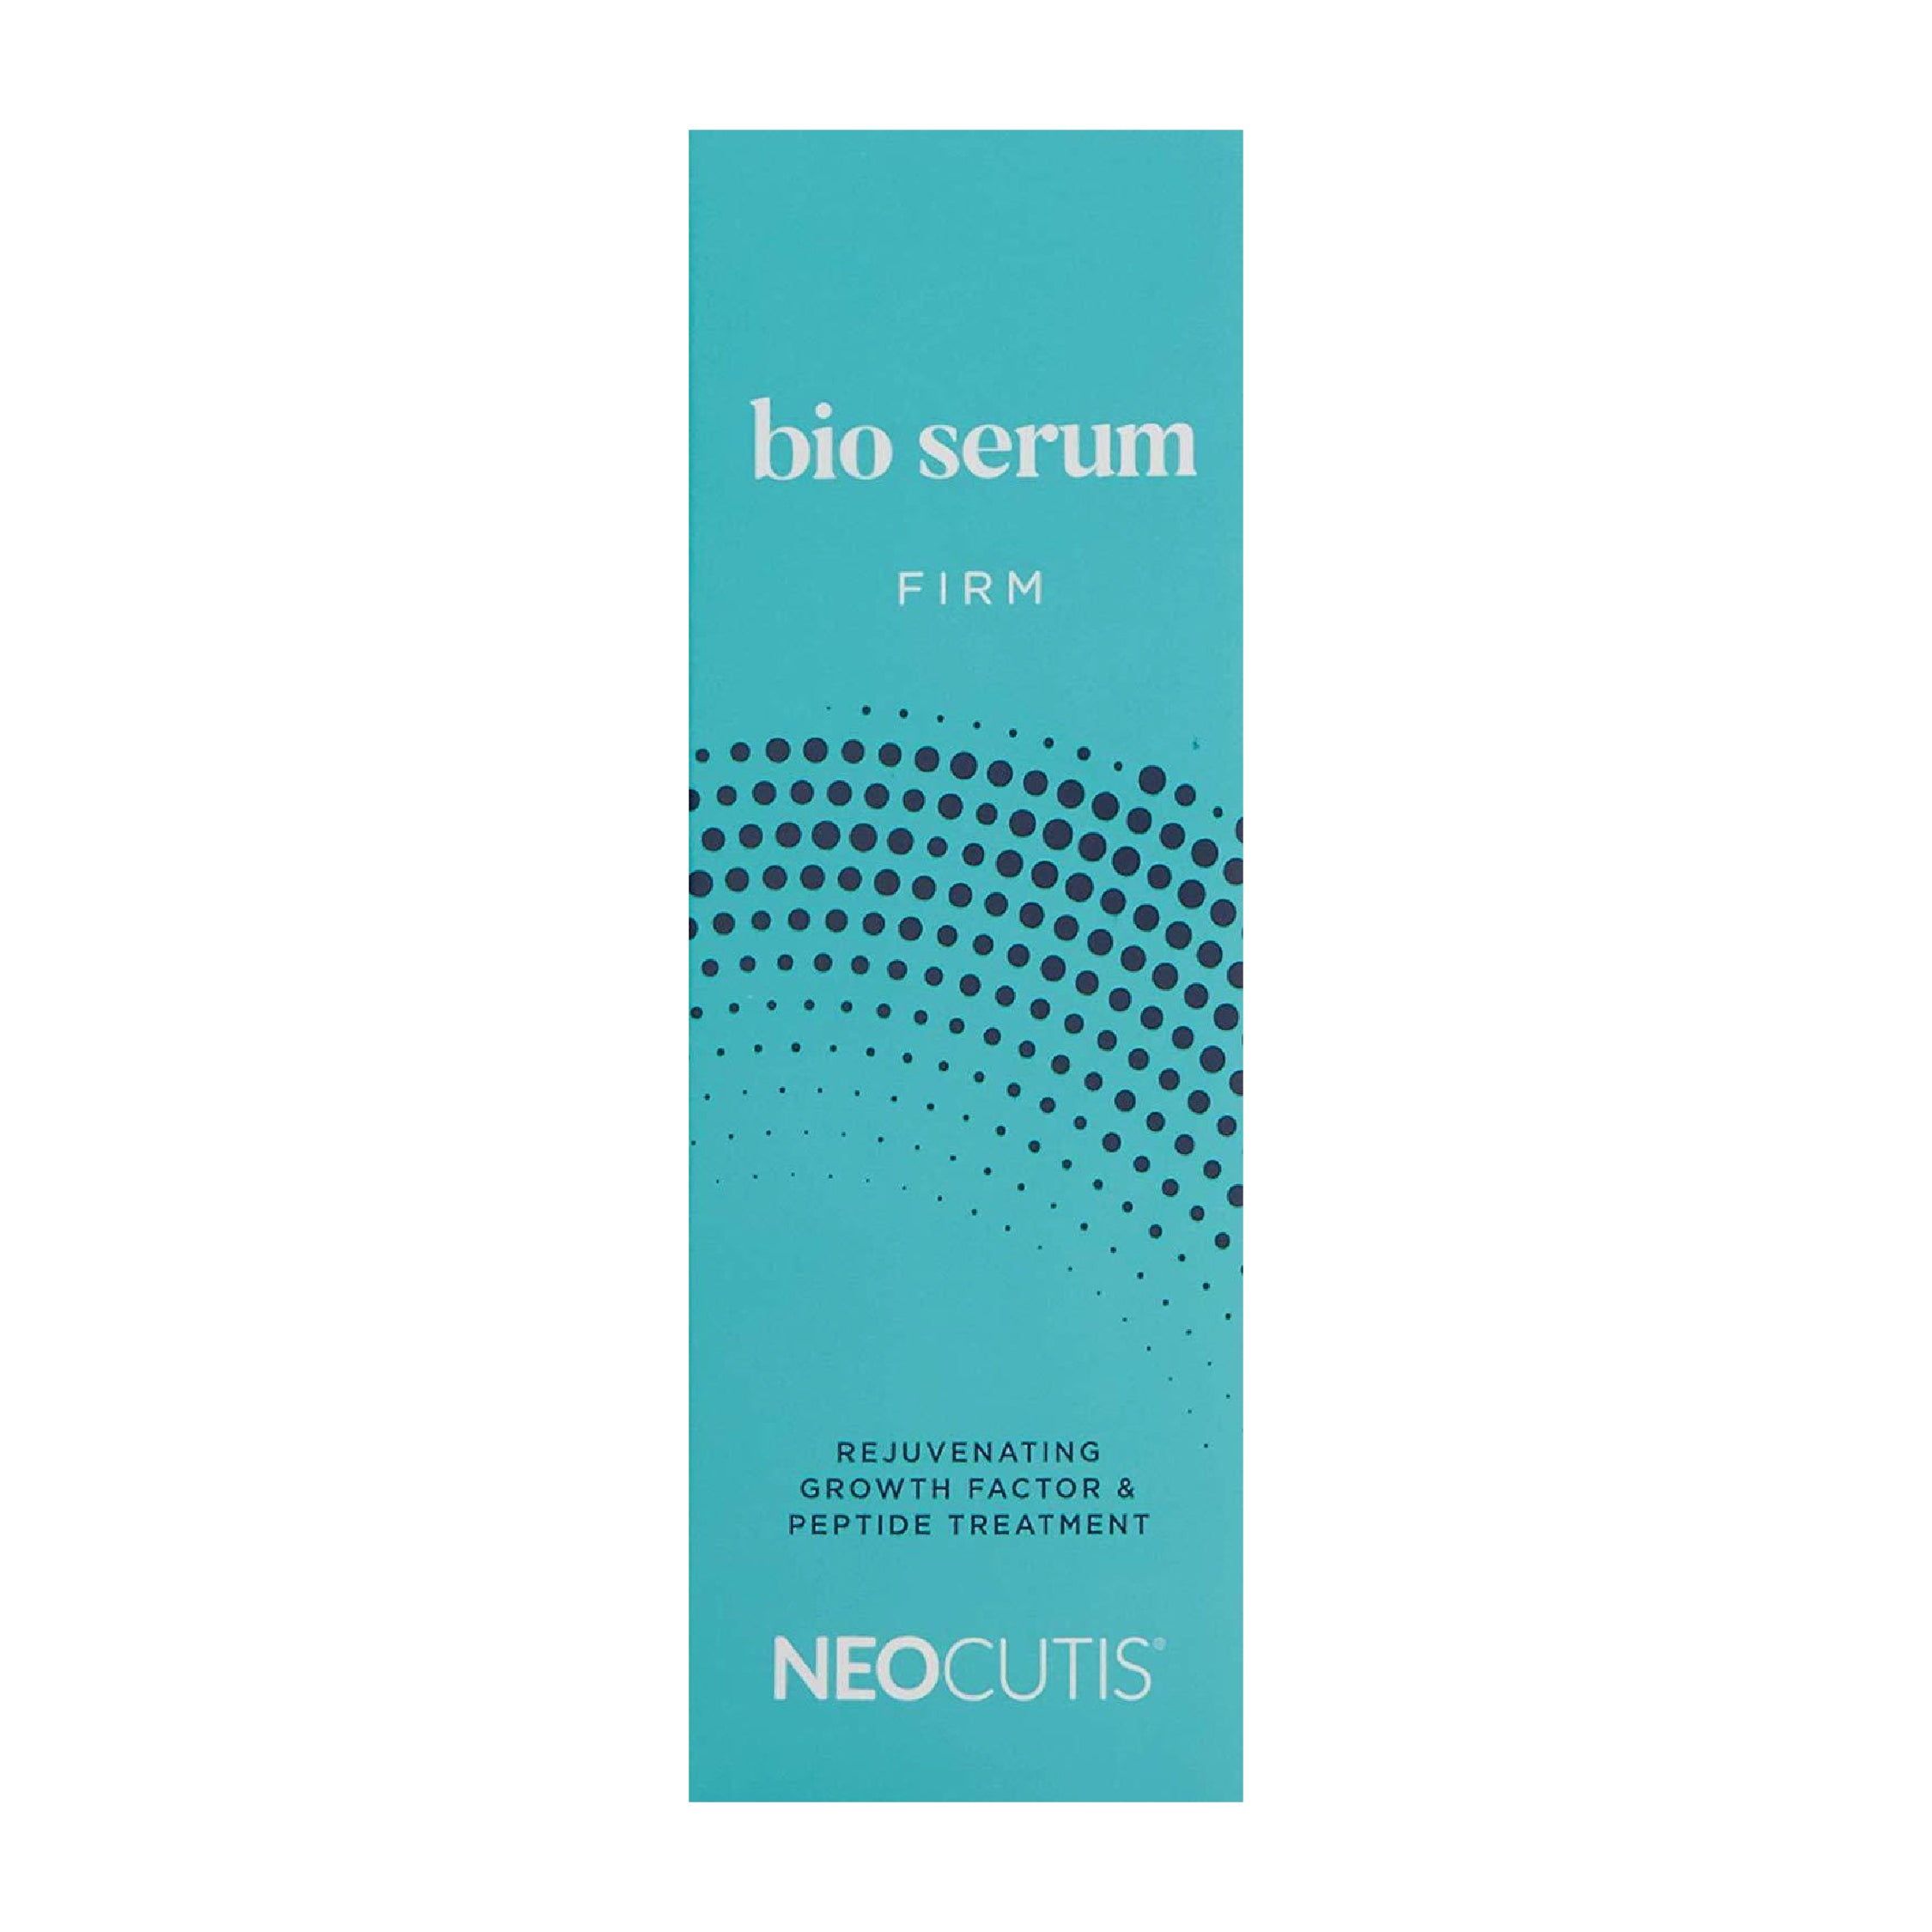 NEOCUTIS Bio Serum Firm - 30 ML - | 5 Month Supply | Nourishes & restores collagen, elastin and hyaluronic acid for a youthful appearance | Rejuvenating Growth Factor & Peptide Treatment |Dermatologist tested